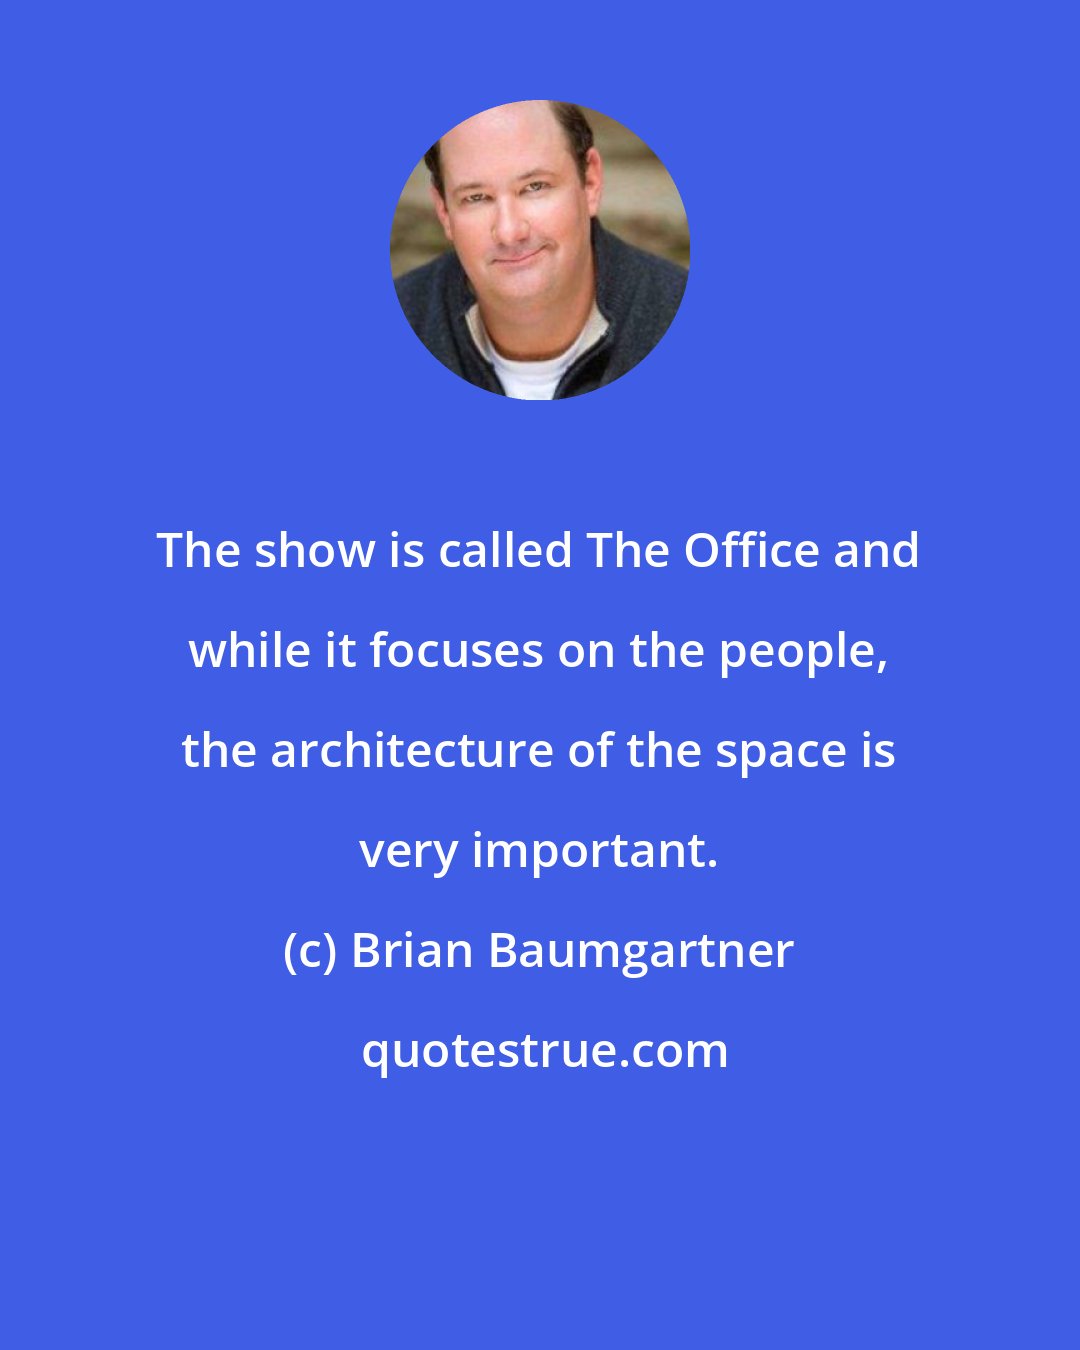 Brian Baumgartner: The show is called The Office and while it focuses on the people, the architecture of the space is very important.